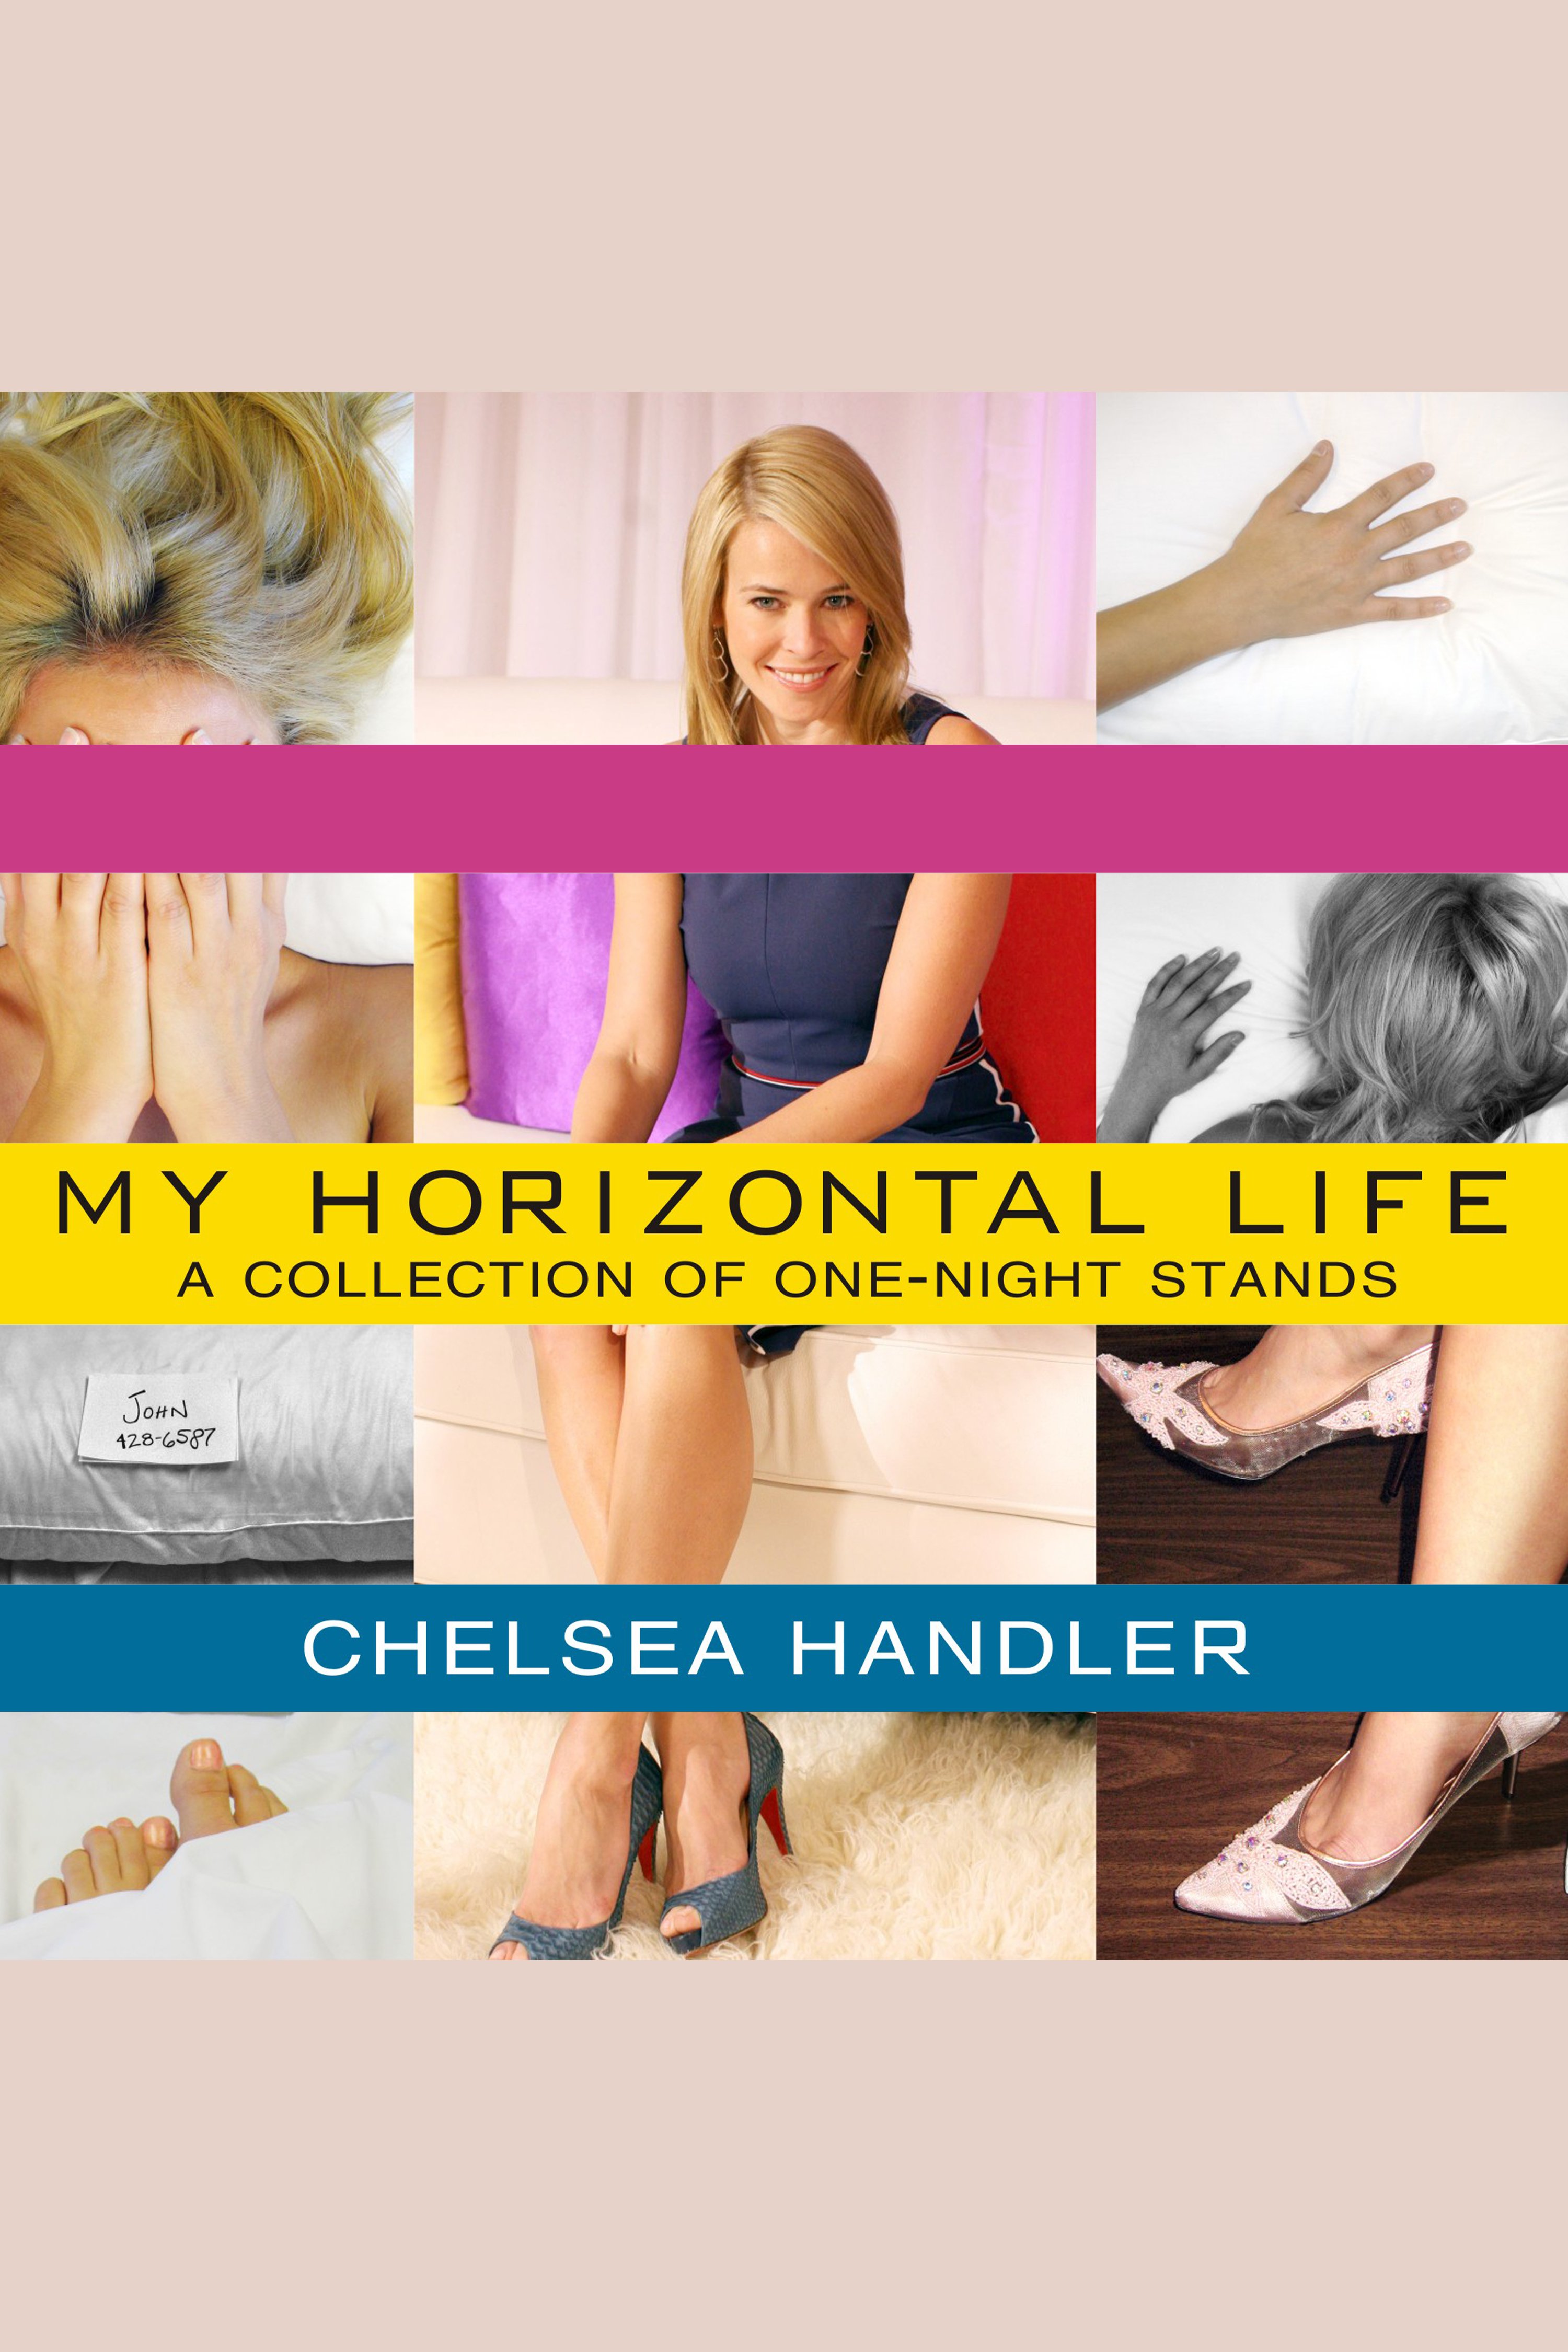 My horizontal life a collection of one-night stands cover image